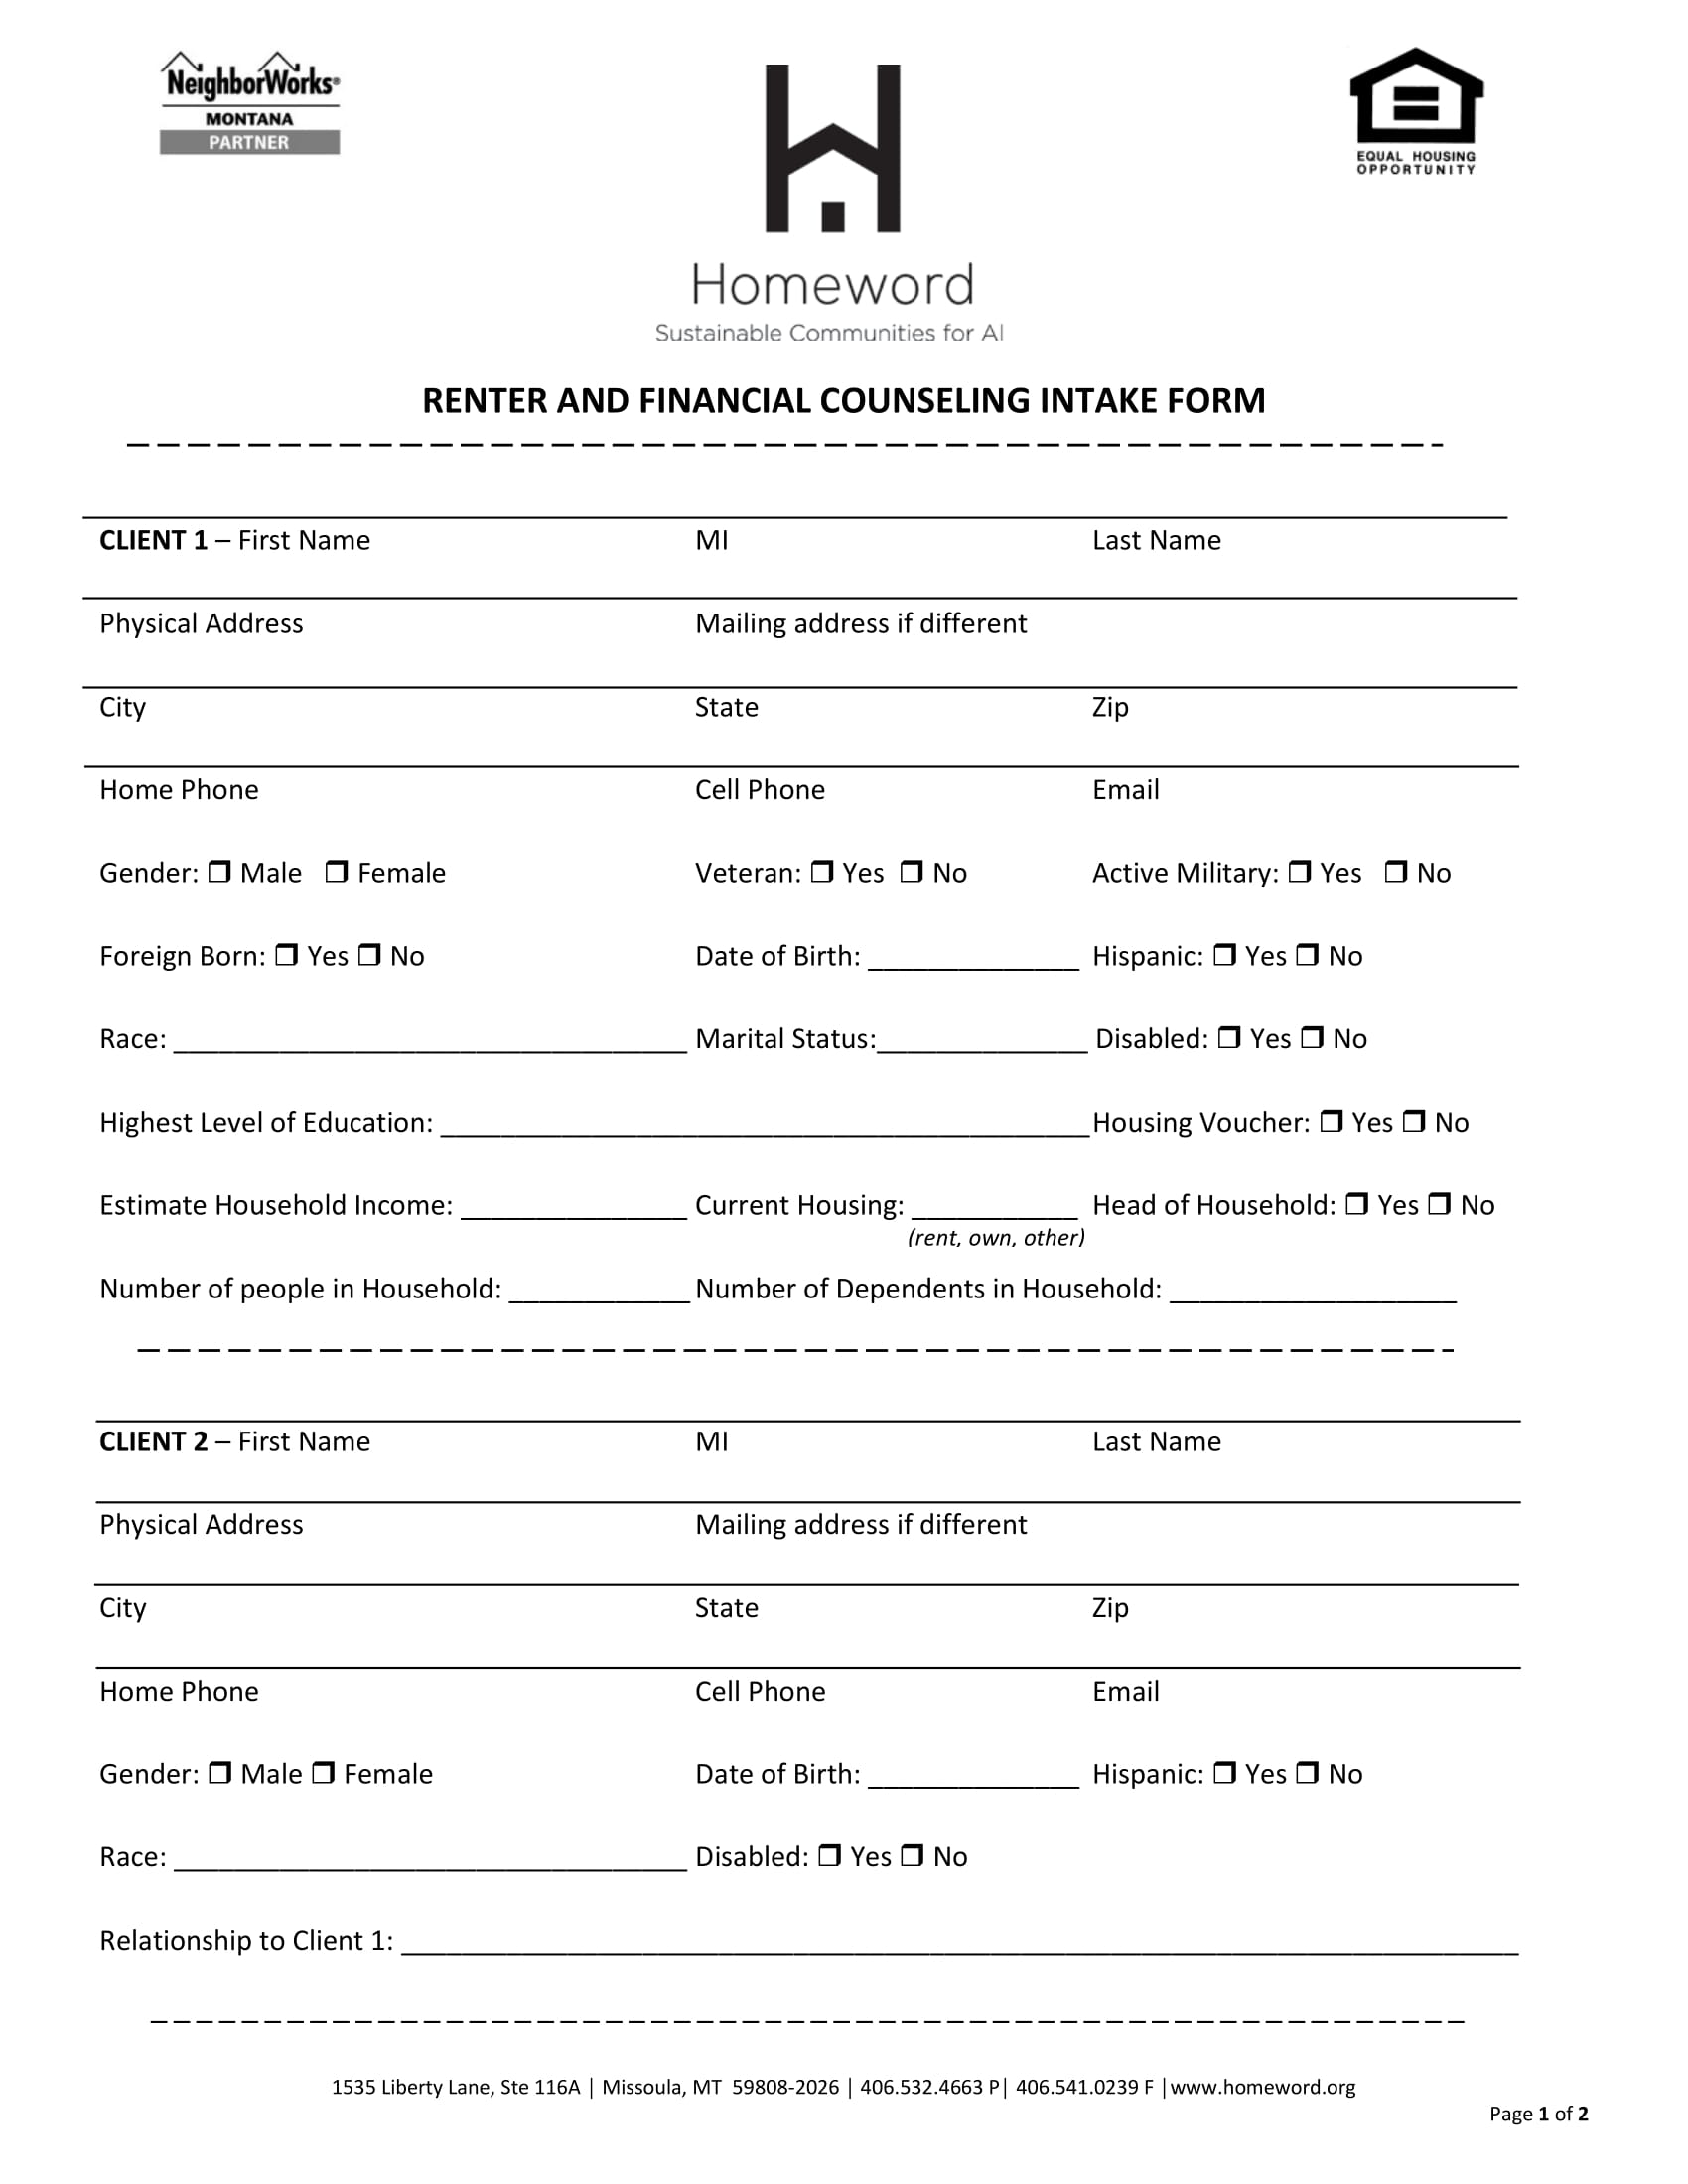 financial counseling intake form 1